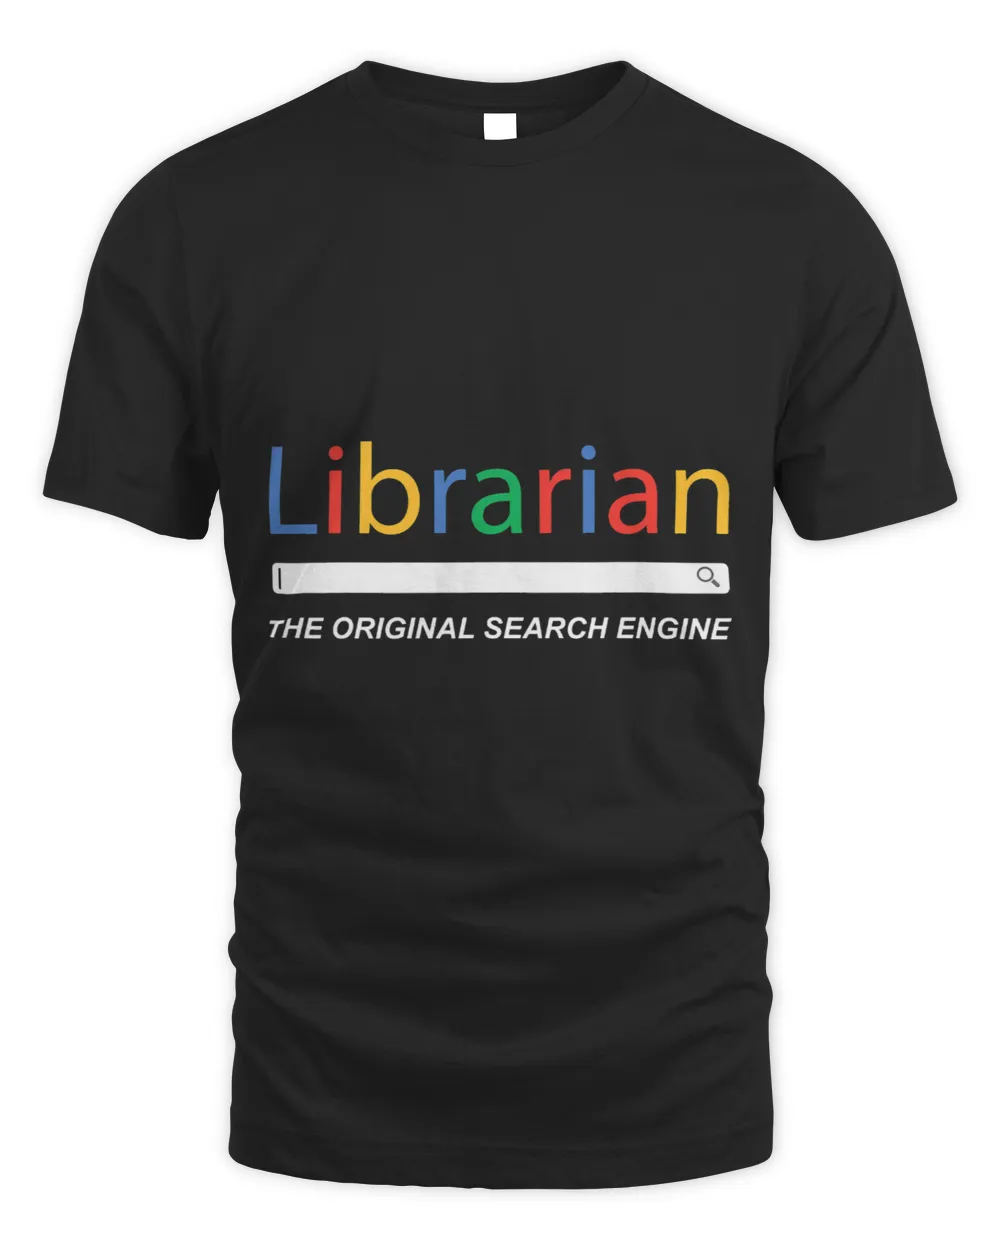 Librarian Job The Original Search Engine Funny and Sarcastic